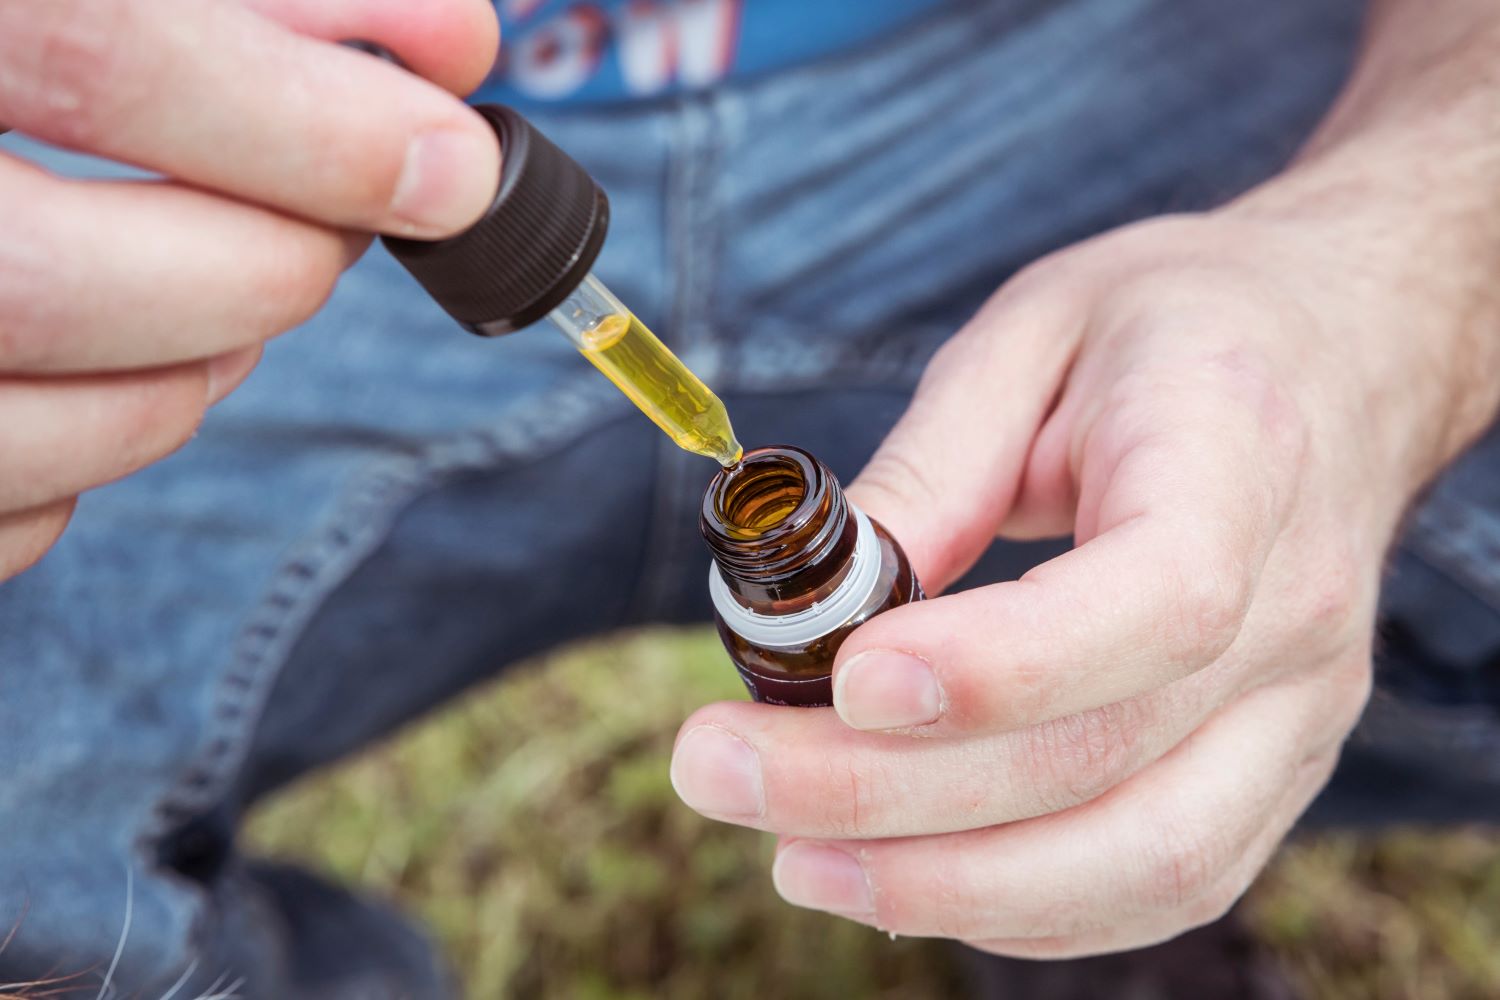 How to use CBD products: a step-by-step guide